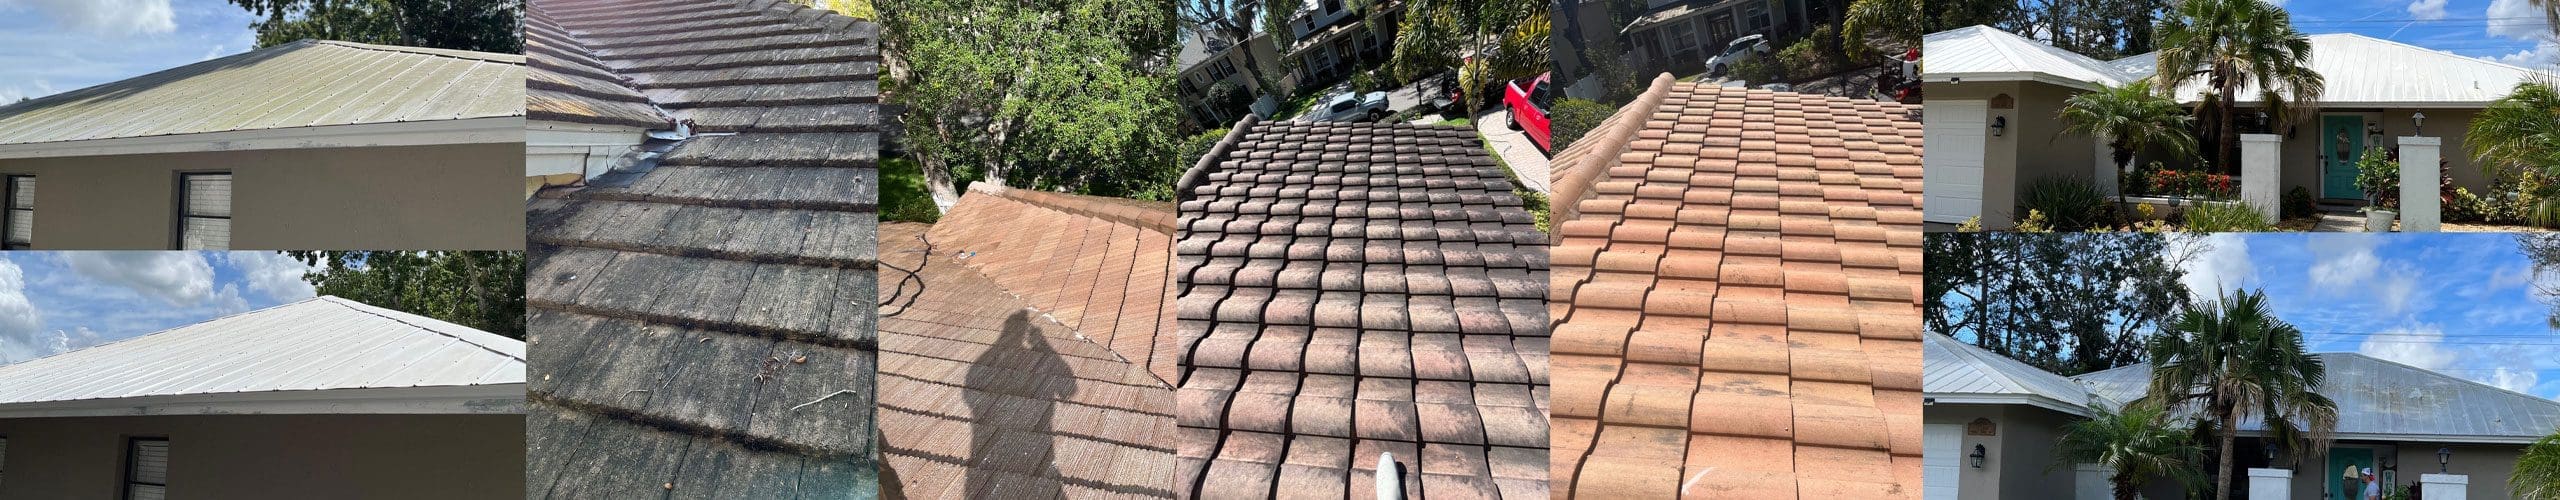 Roof Cleaning in Tampa Florida